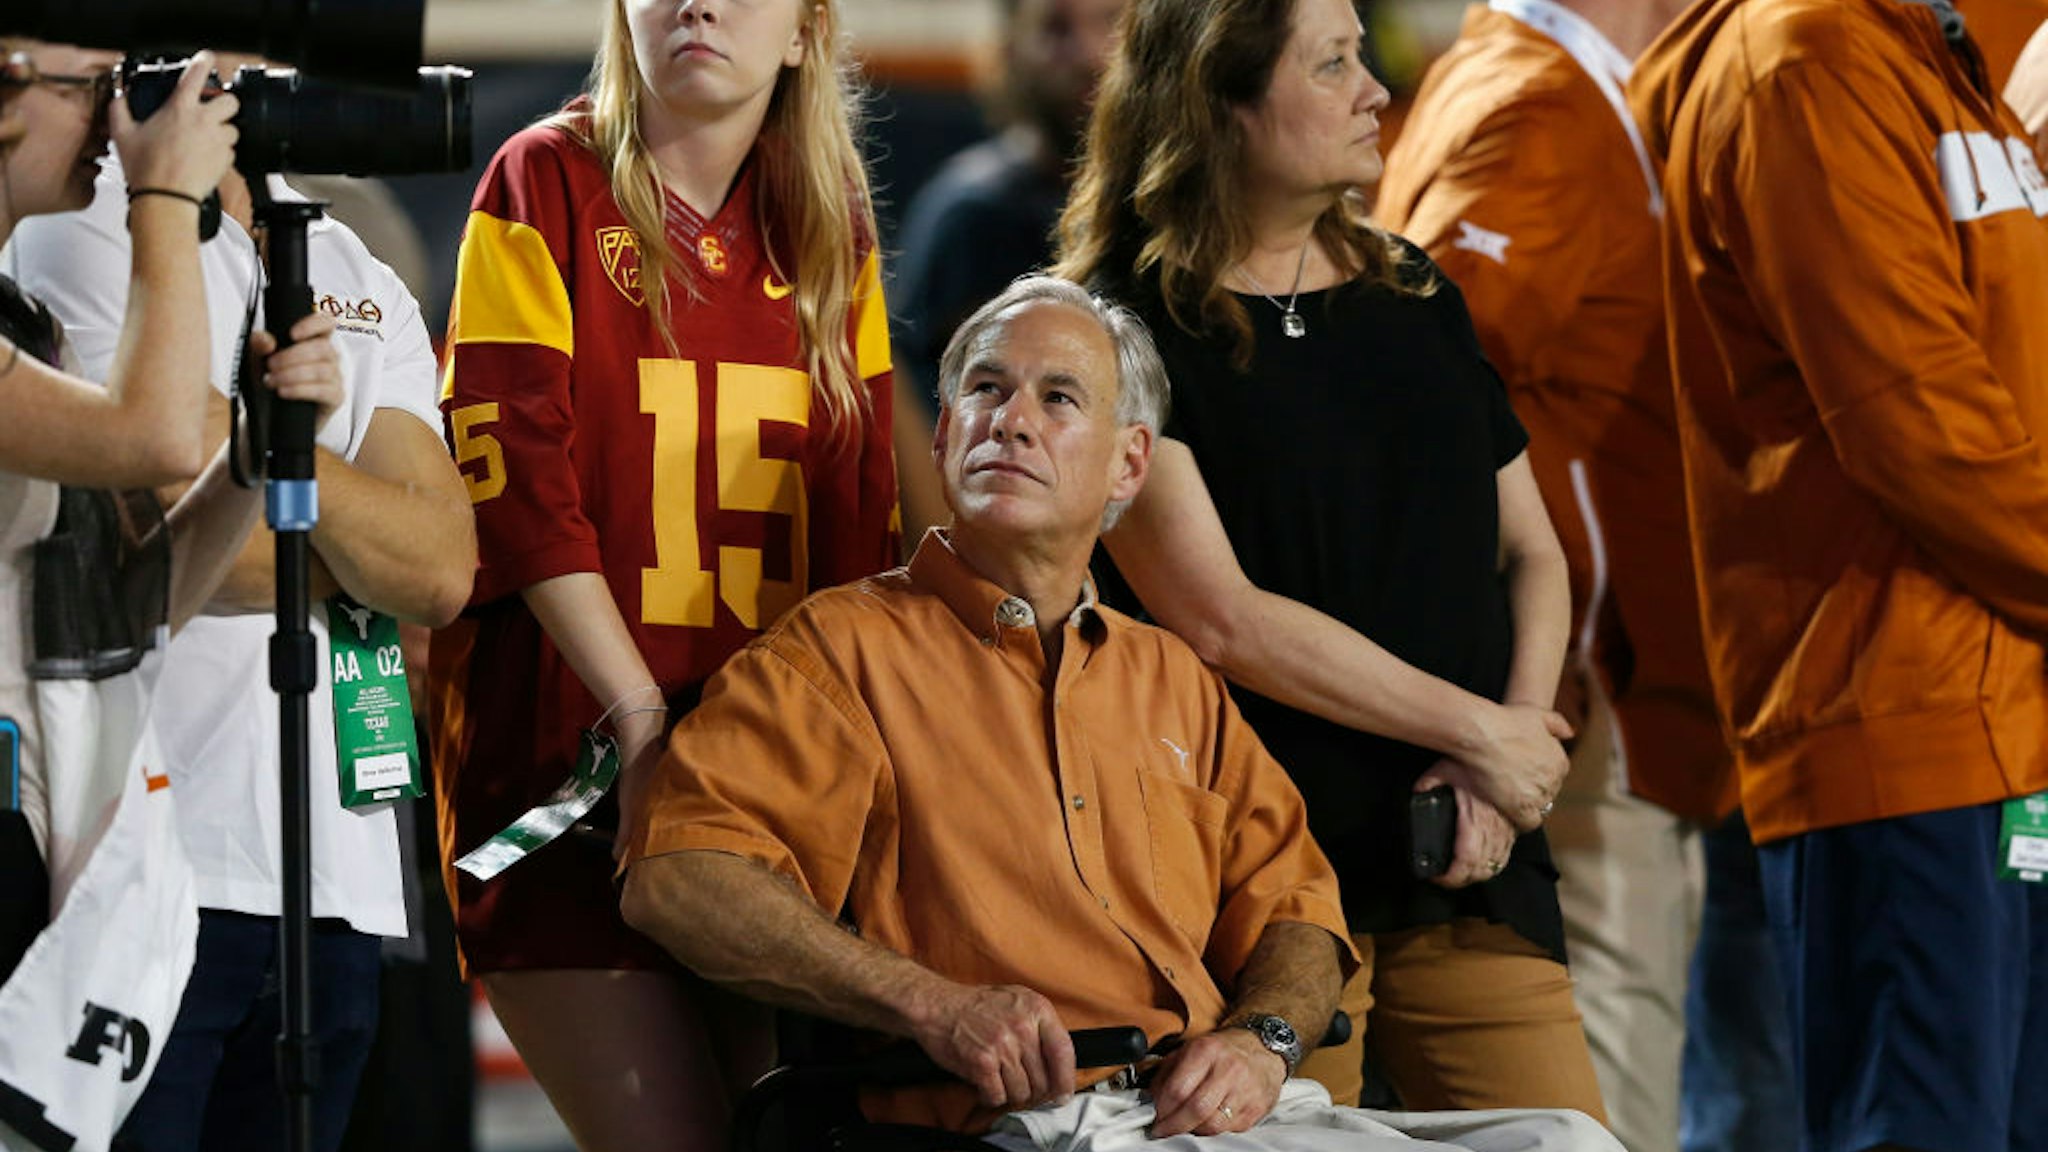 Texas Governor Greg Abbott watches from the sideline in the second half of the game between the Texas Longhorns and the USC Trojans at Darrell K Royal-Texas Memorial Stadium on September 15, 2018 in Austin, Texas.